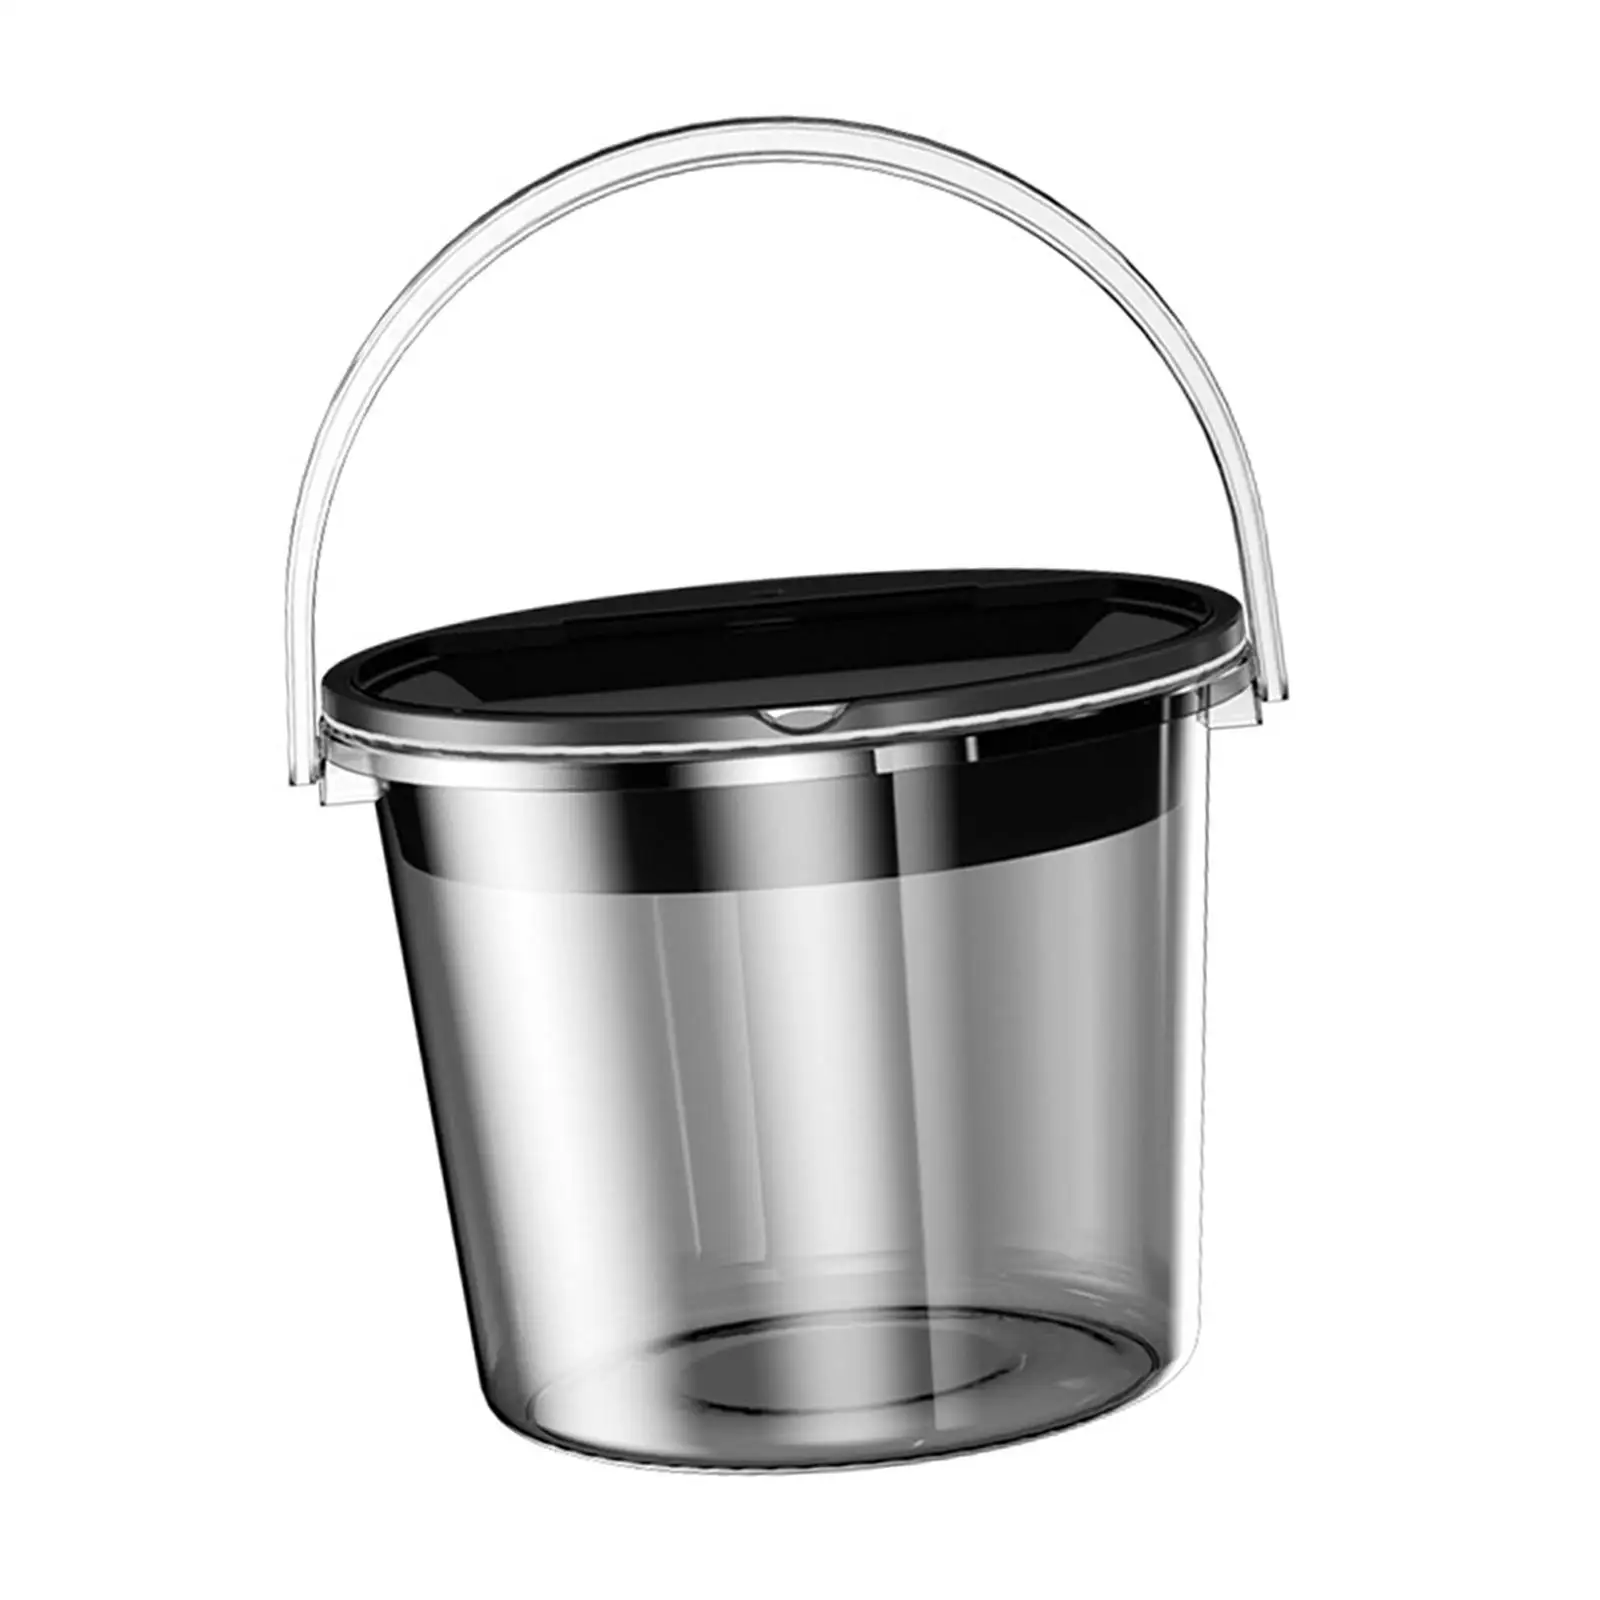 Wastebasket Bin Chinese Kung Fu Tea Accessory Detachable Trash Can Tea Dregs Buckets Garbage Can for Home Bedroom Office Kitchen